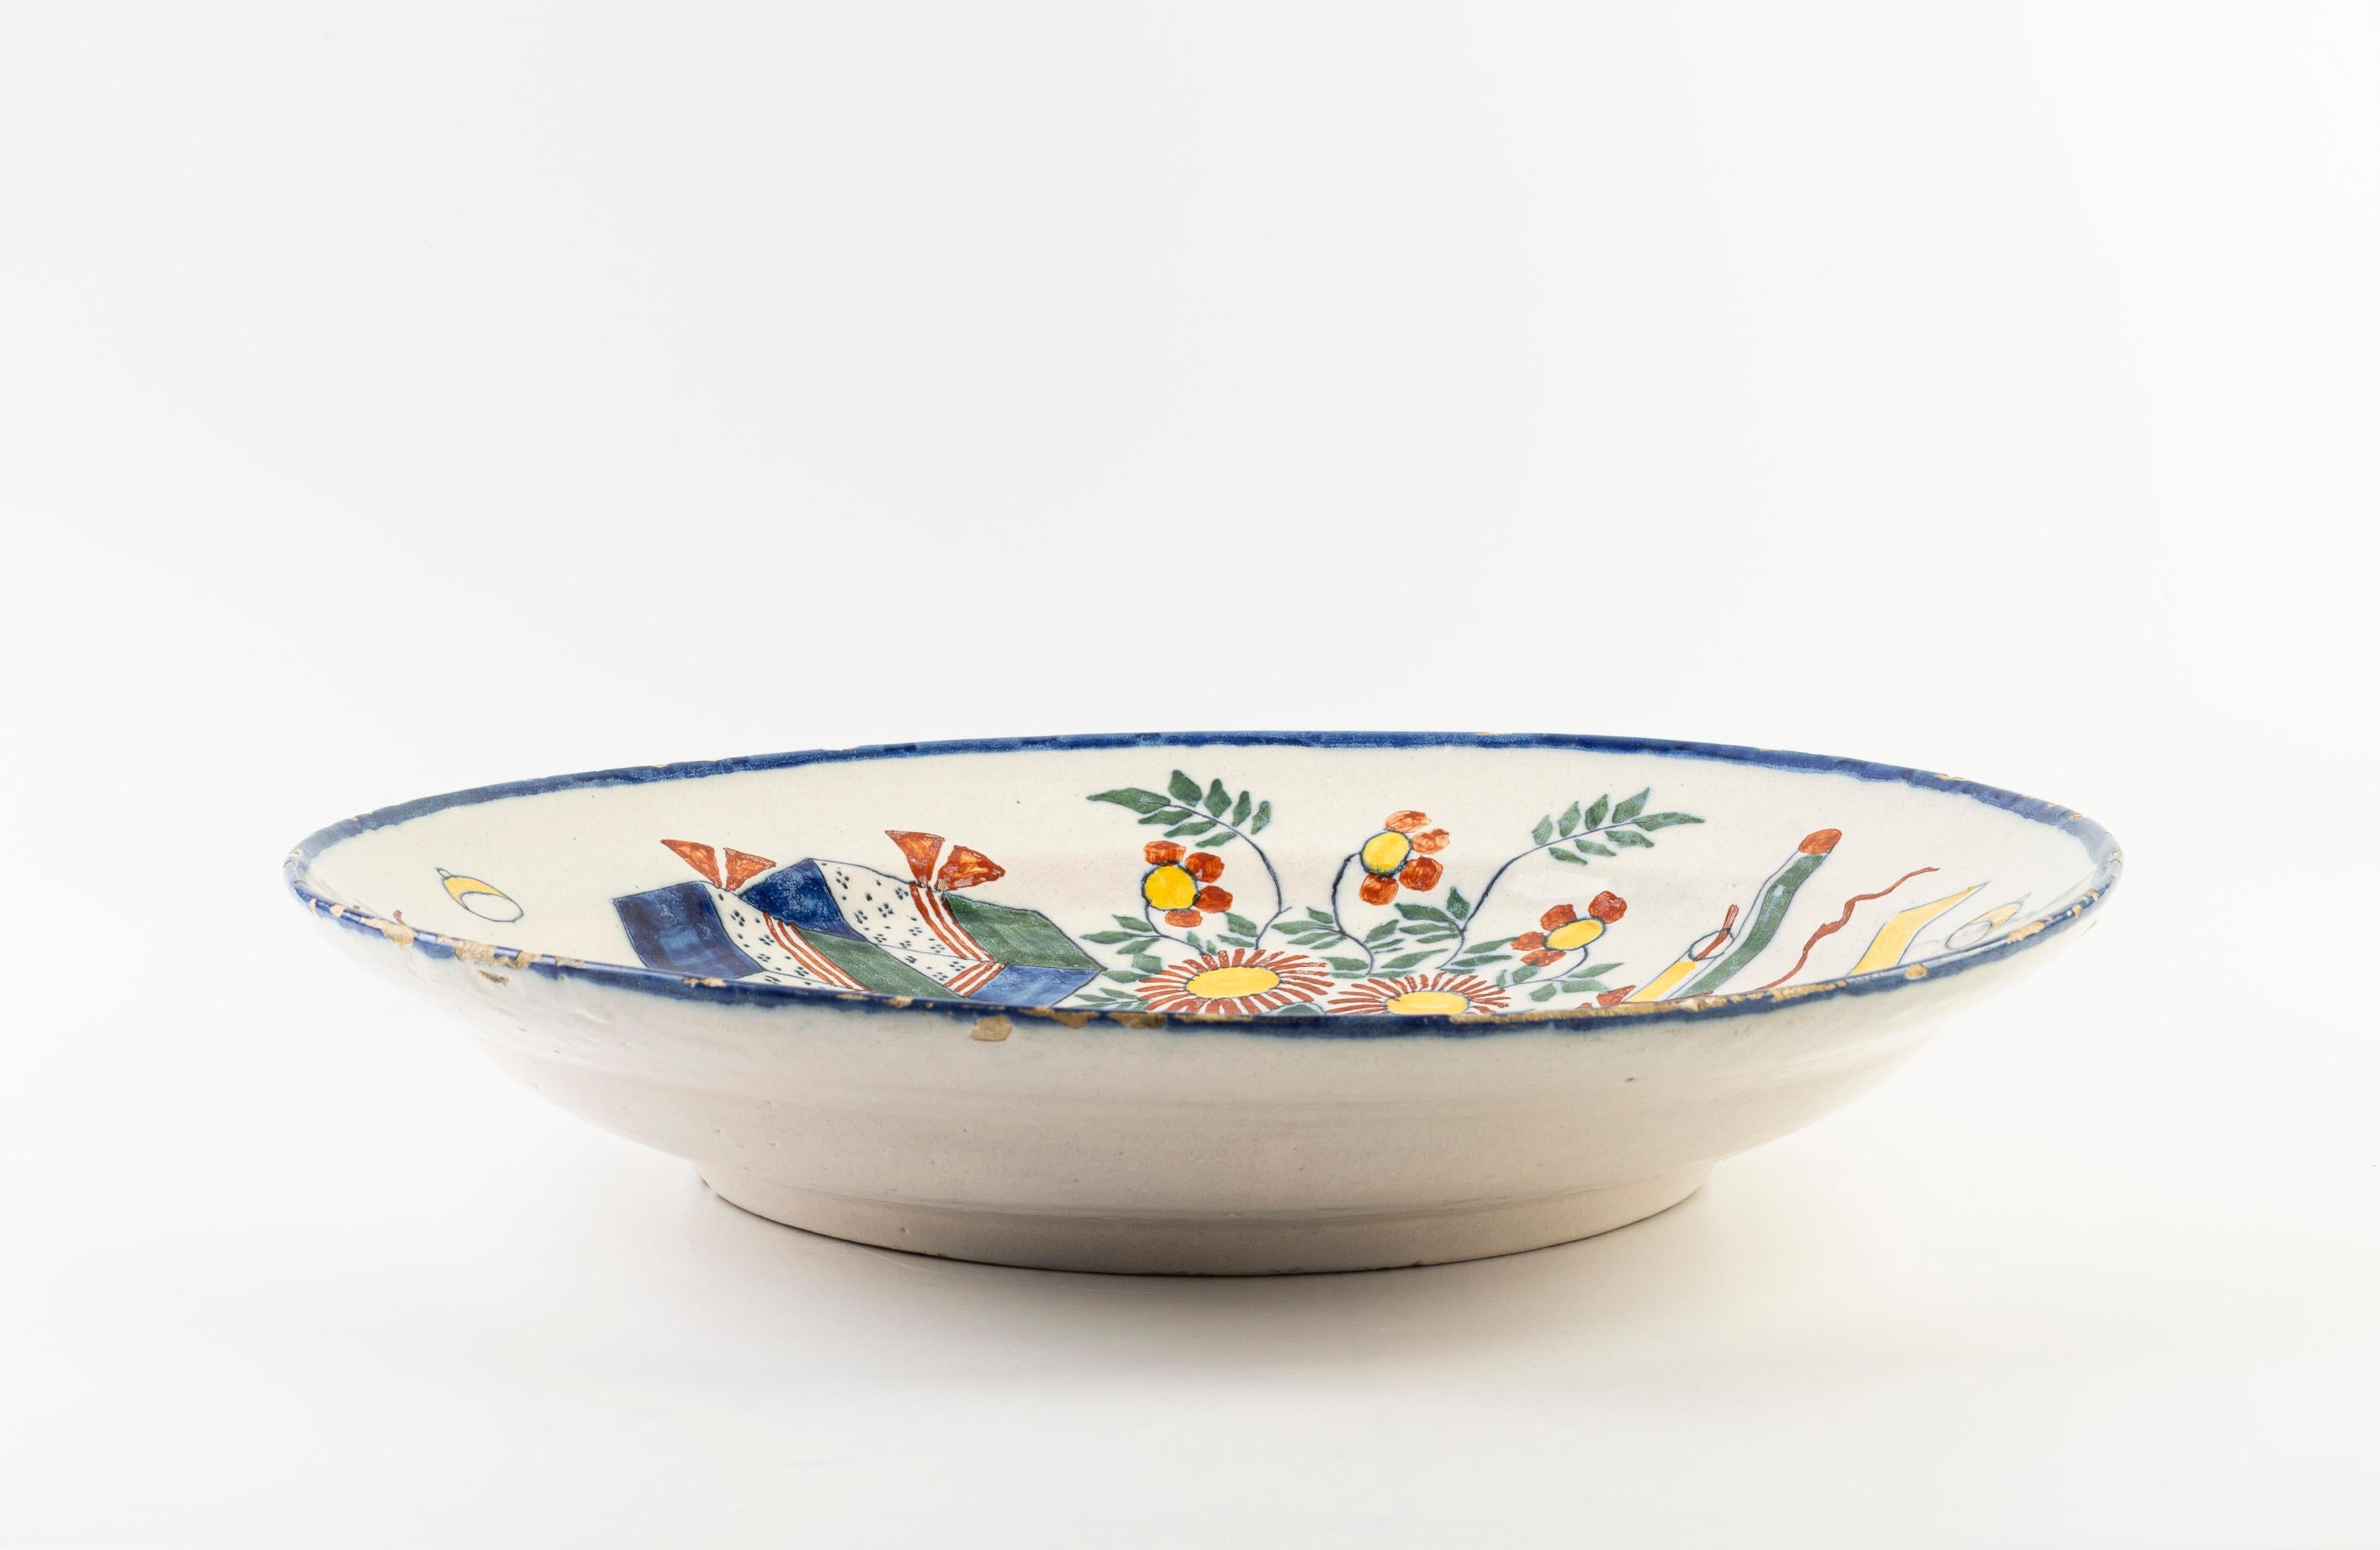 Dutch Porcelain plate is a precious decorative object in eartenware, a charger with 